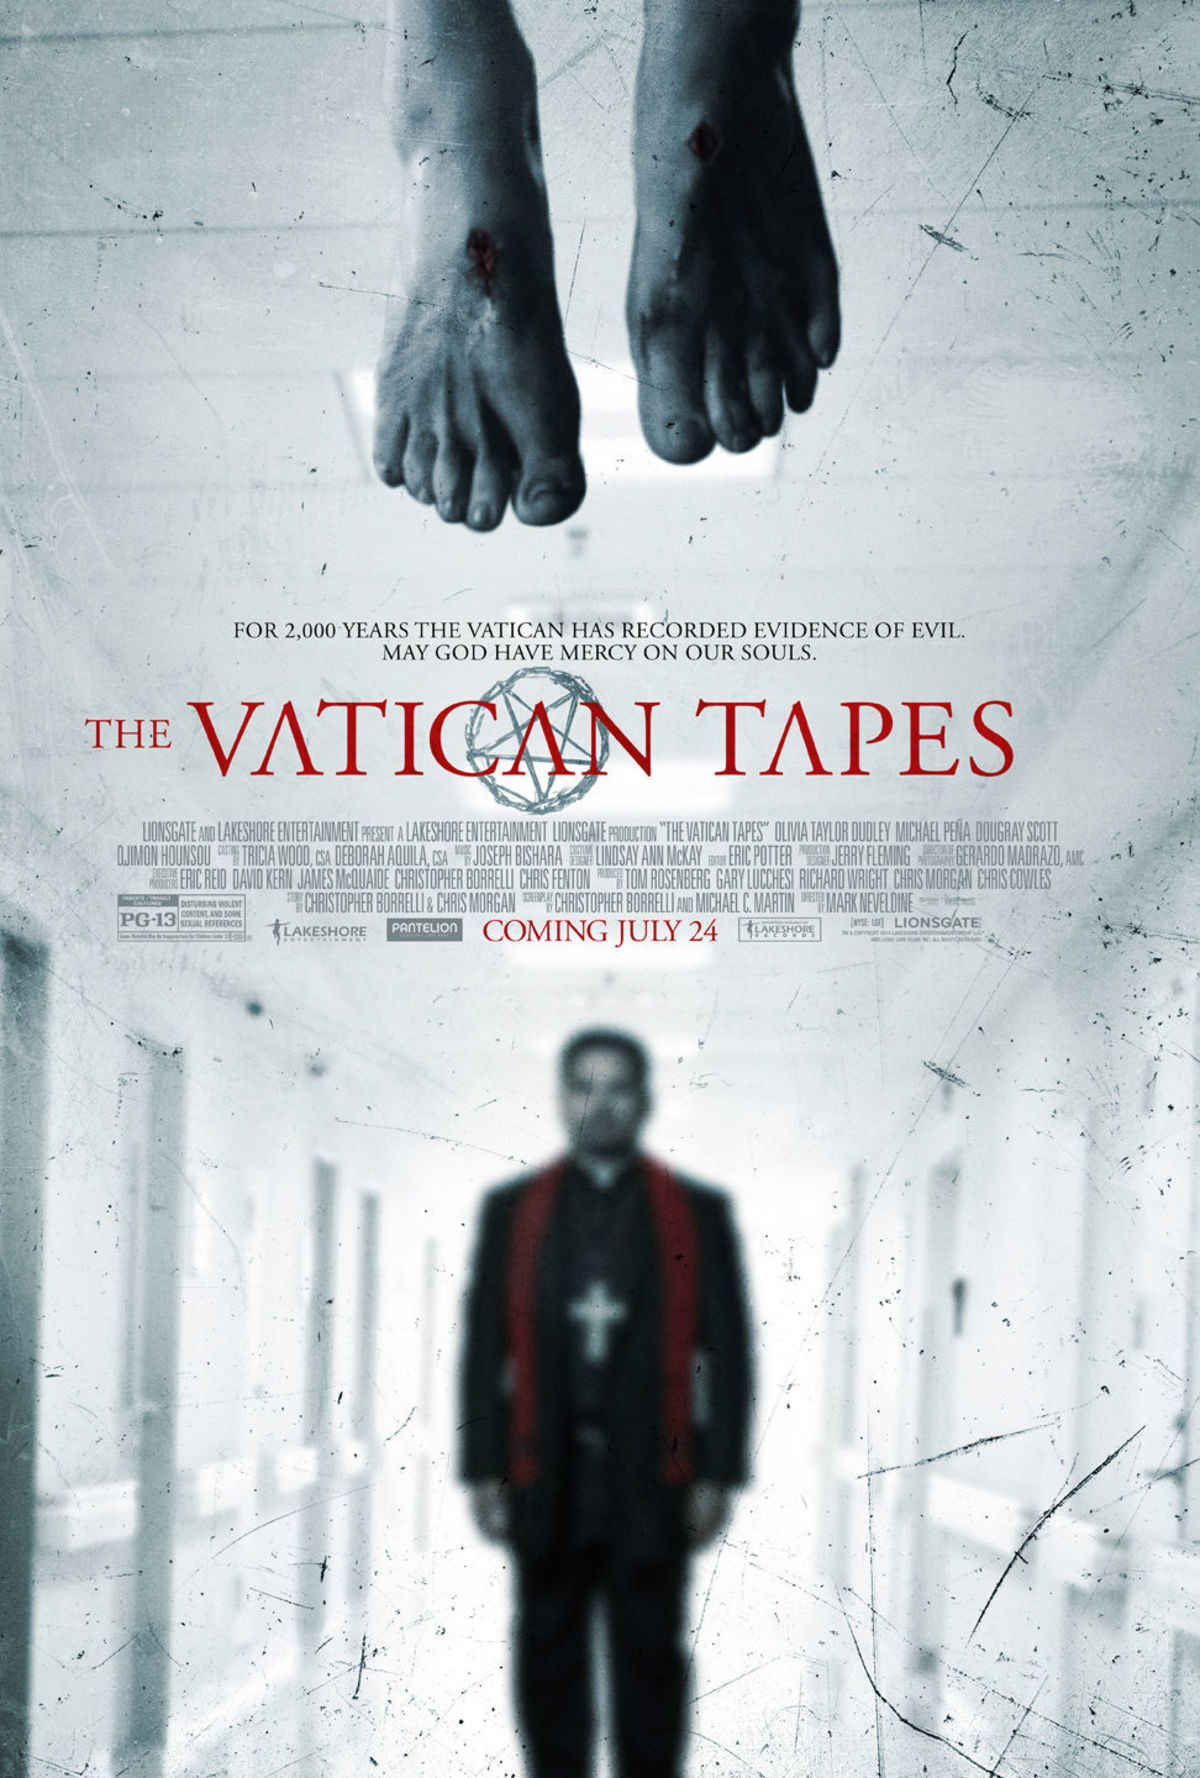 the vatican tapes full movie free download